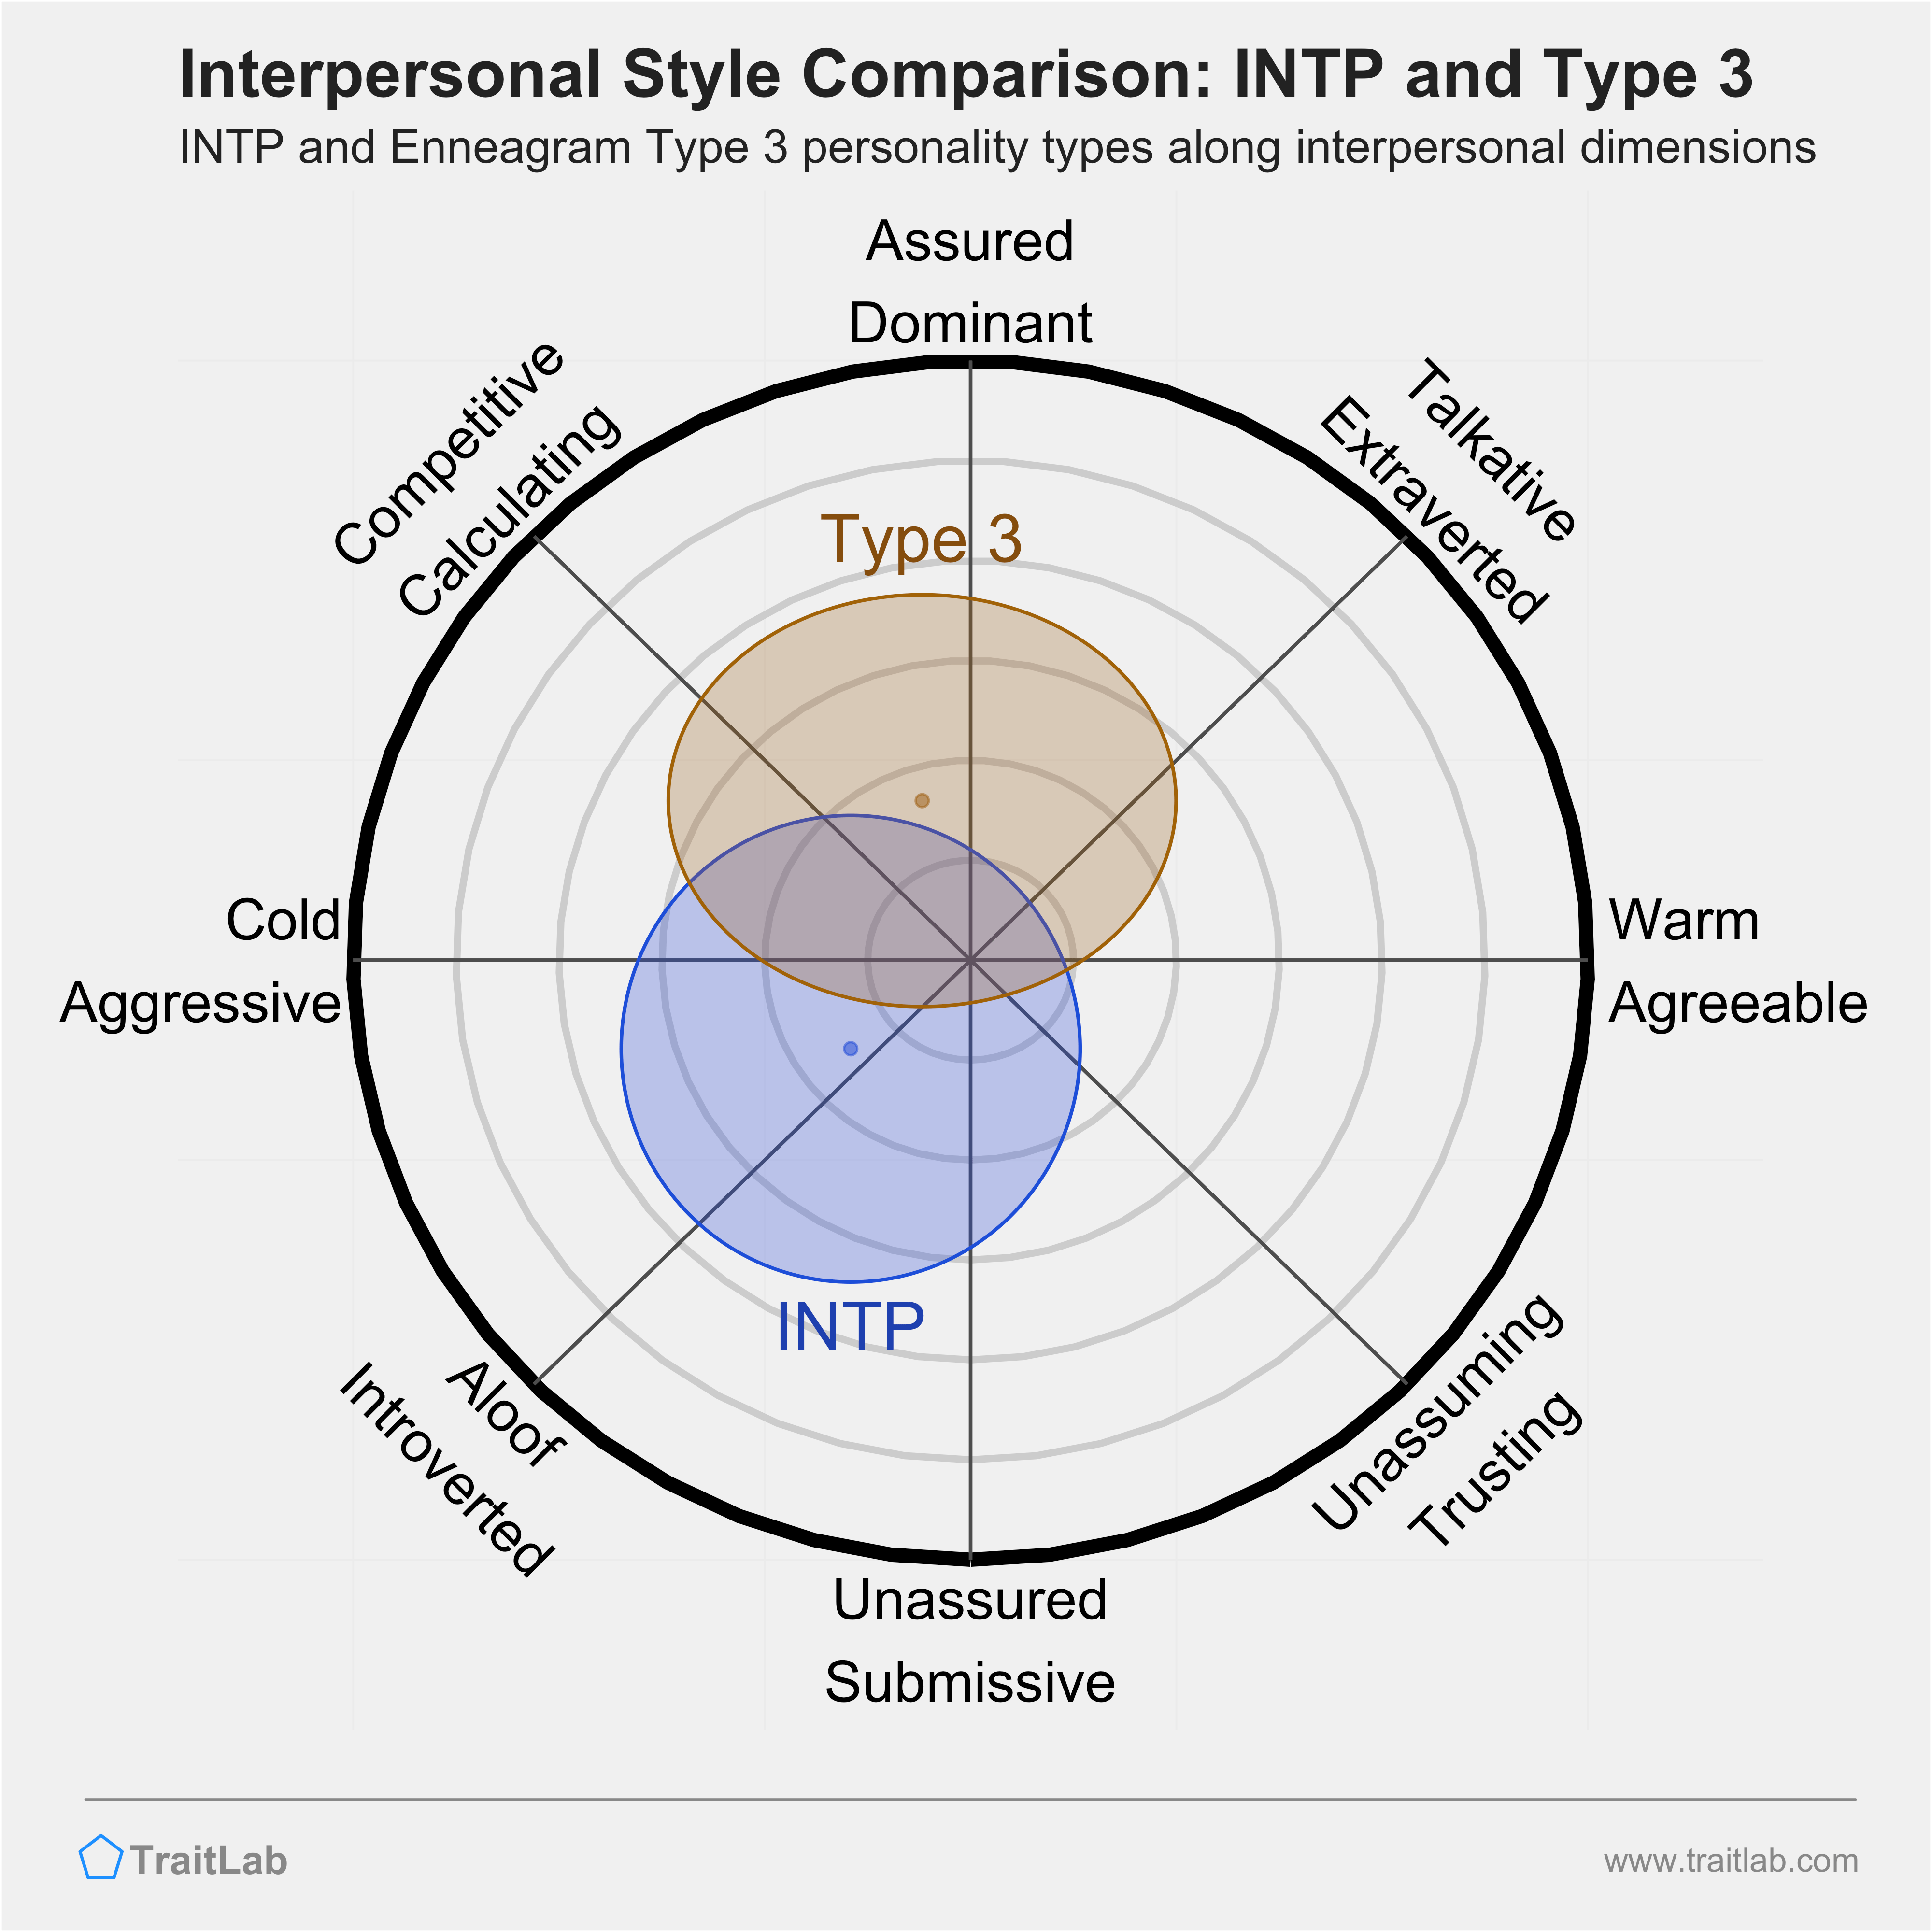 Enneagram INTP and Type 3 comparison across interpersonal dimensions